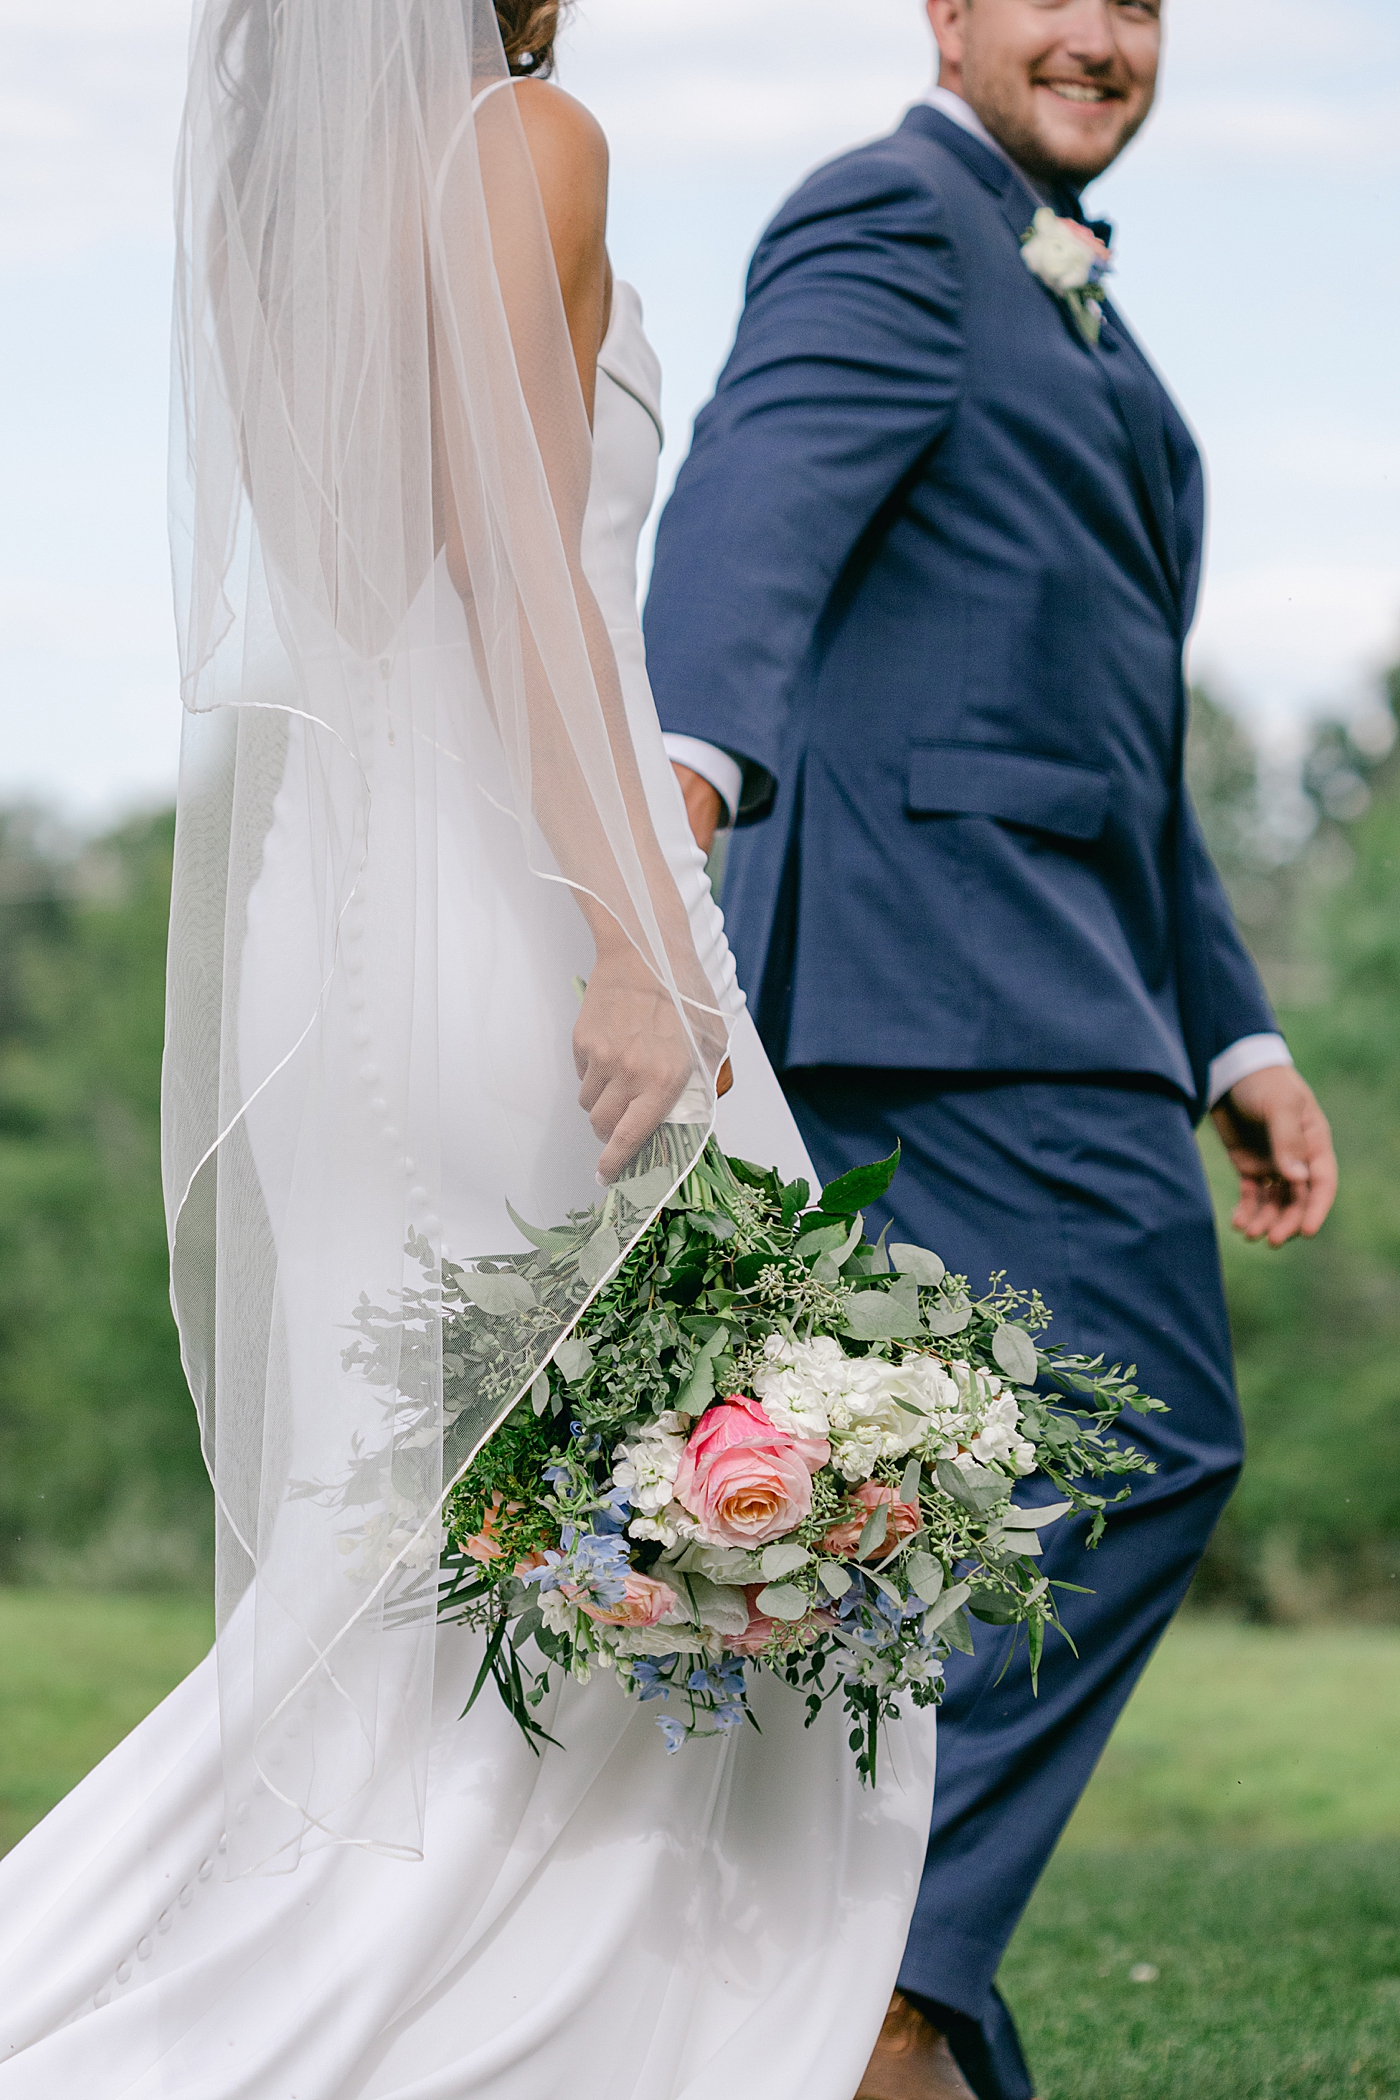 Detail of bride and groom holding hands and bouquet | Image by Hope Helmuth Photography